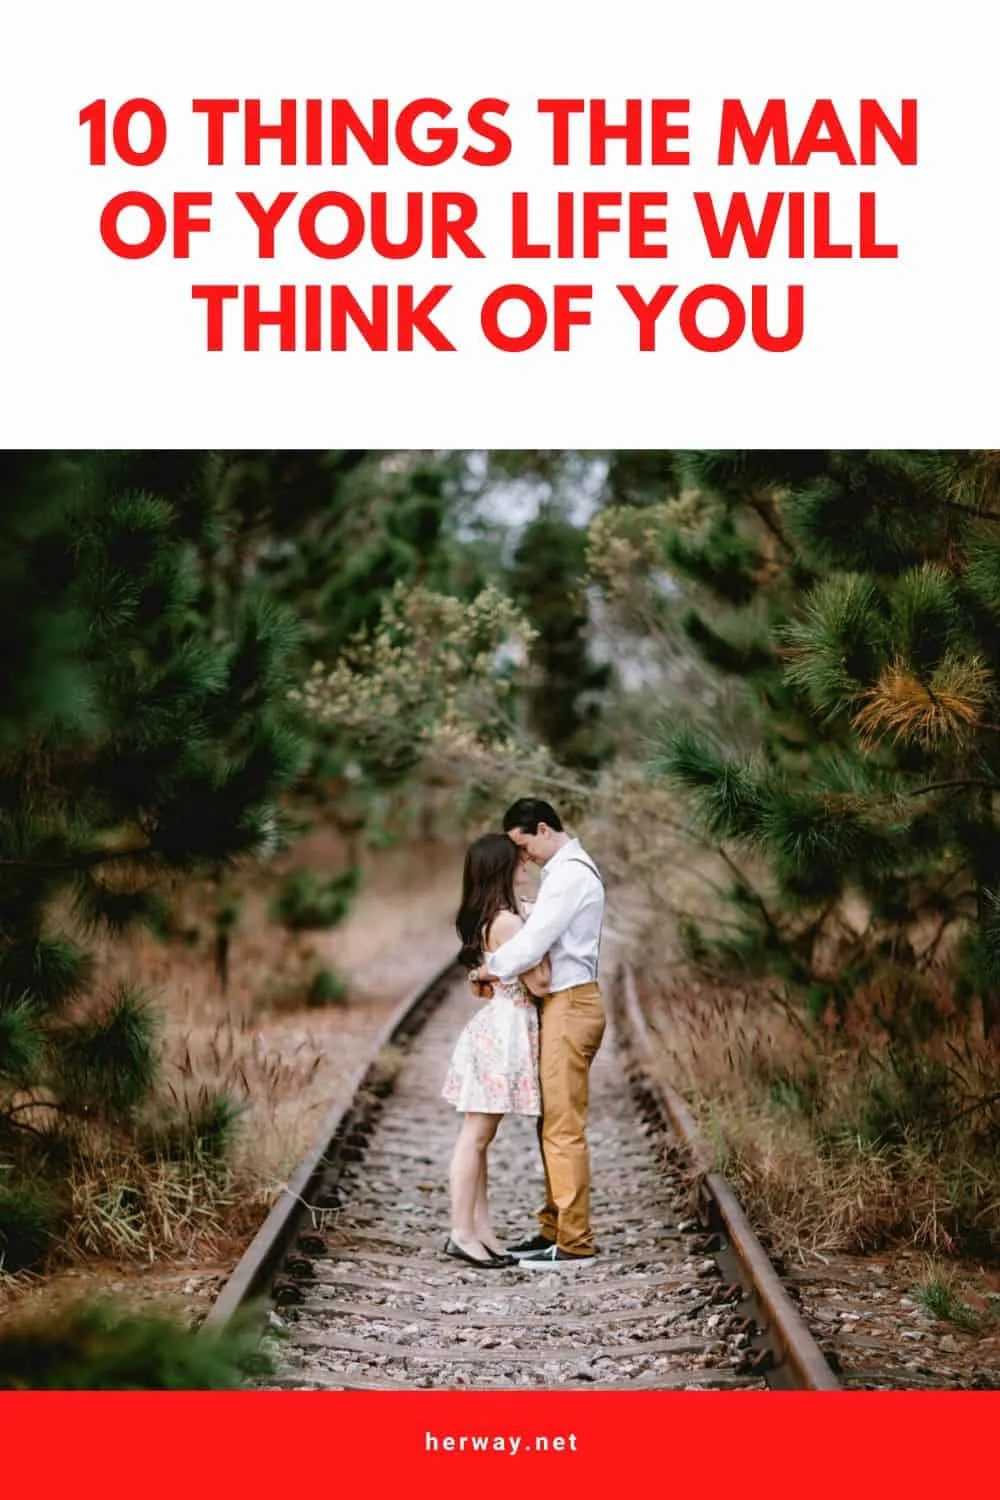 10 Things The Man Of Your Life Will Think Of You